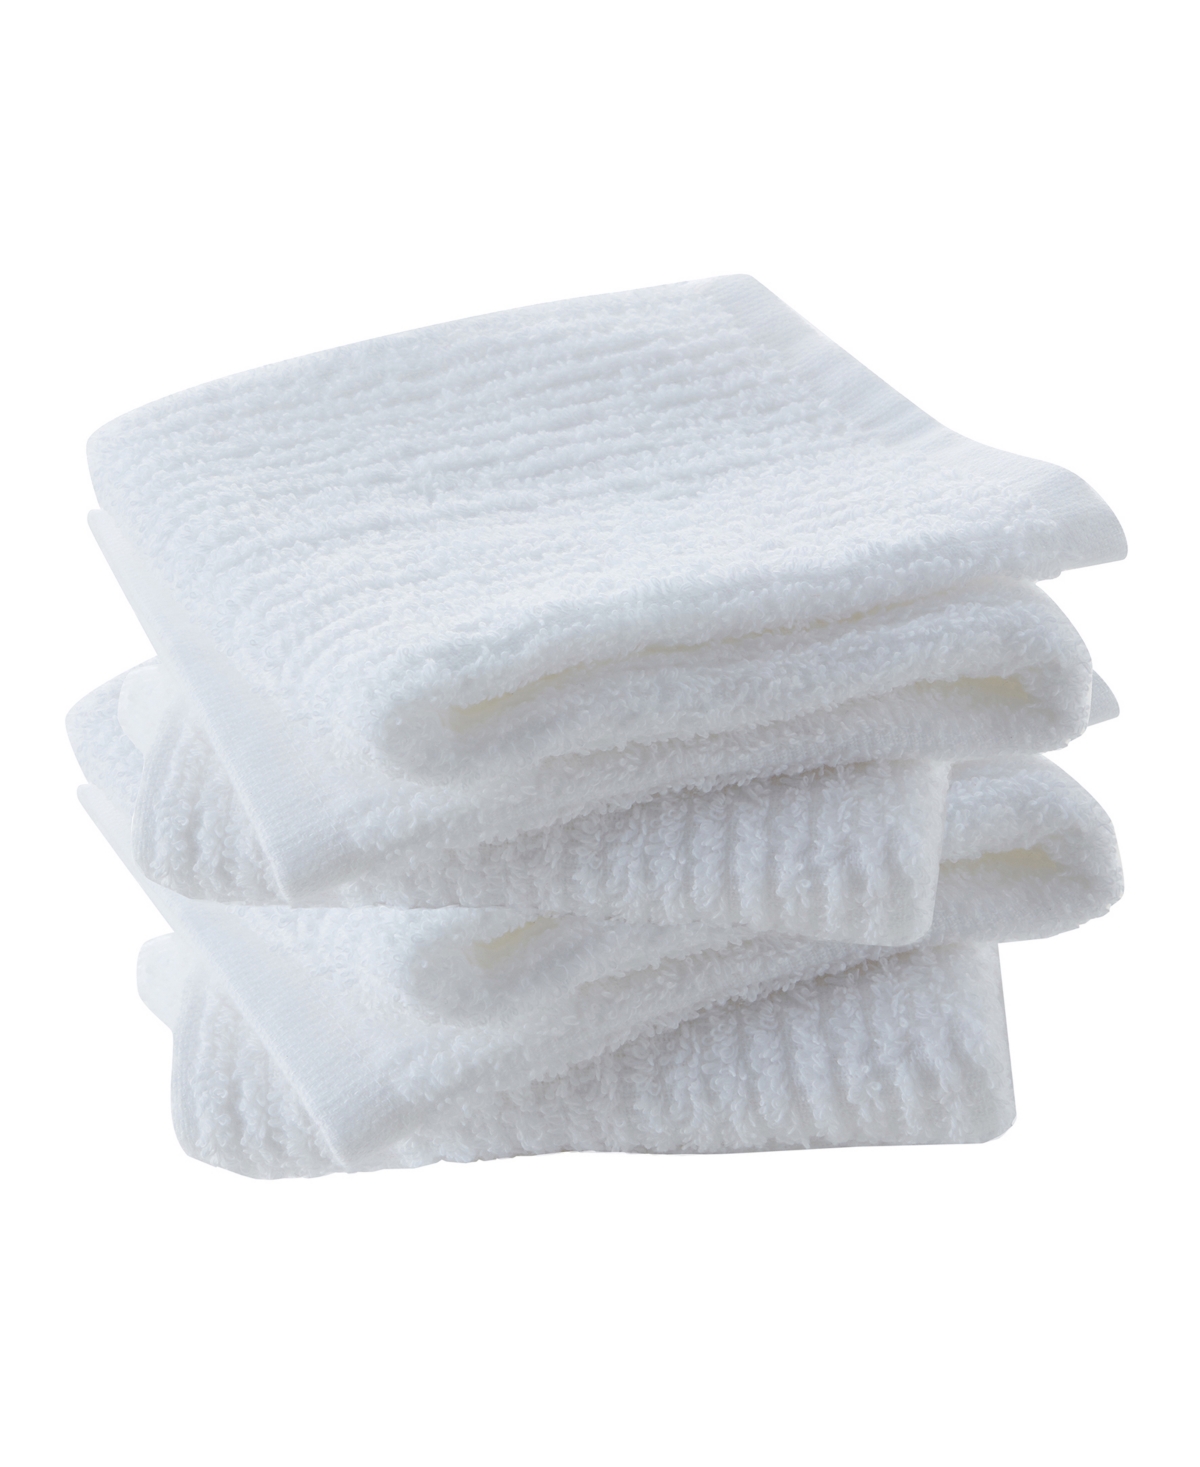 Bar Mop Kitchen Towel, Pack of 4 - White